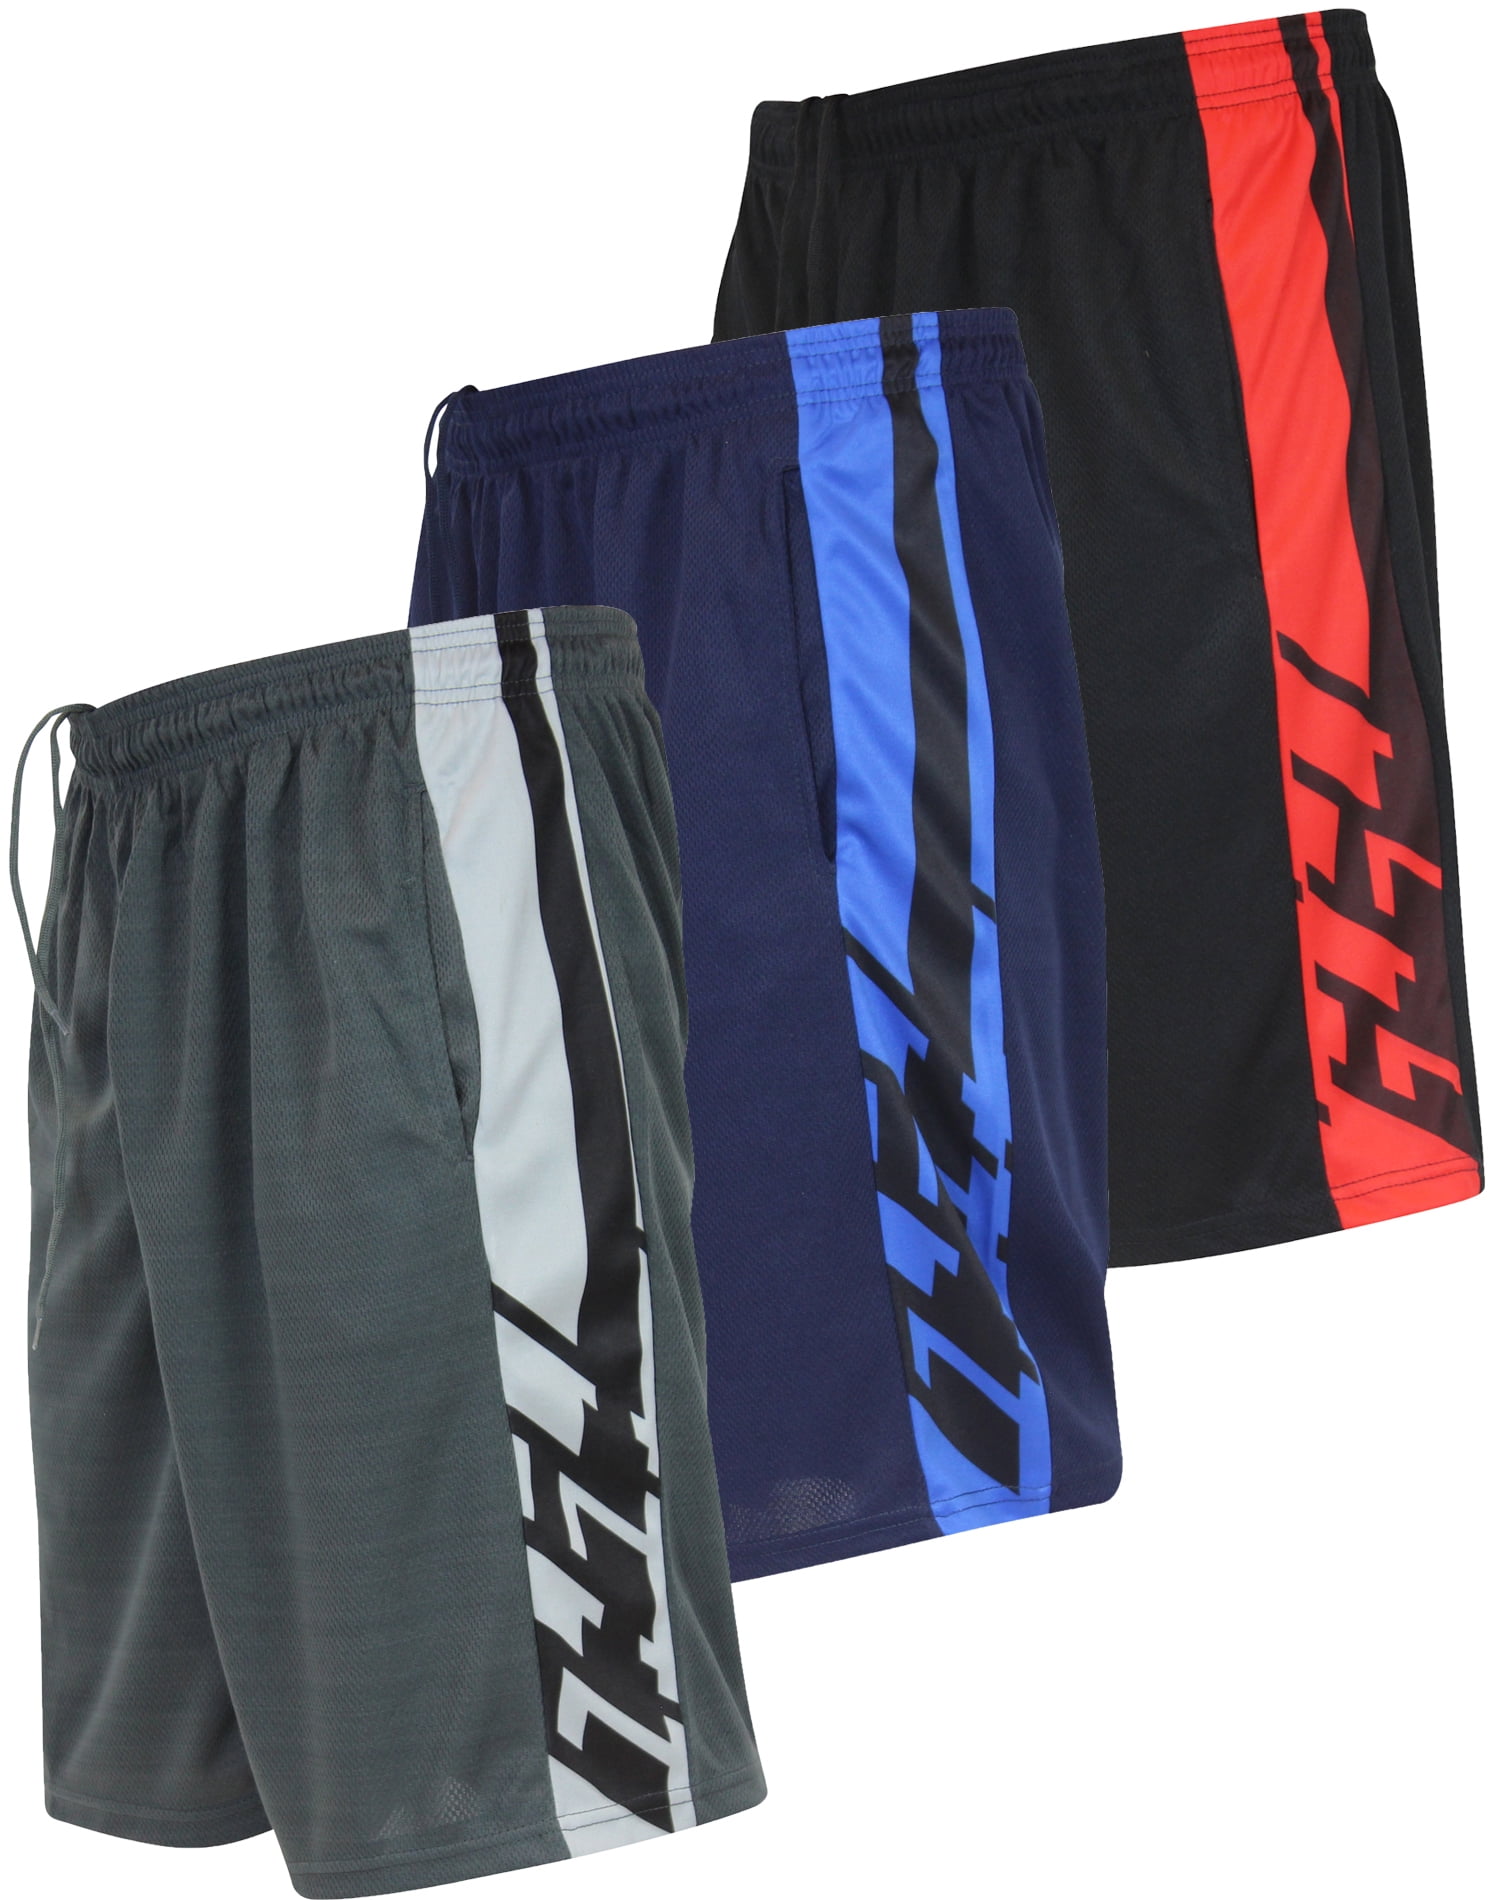 Men's Athletic Mesh Workout Fitness Training Basketball Sports Gym Shorts 